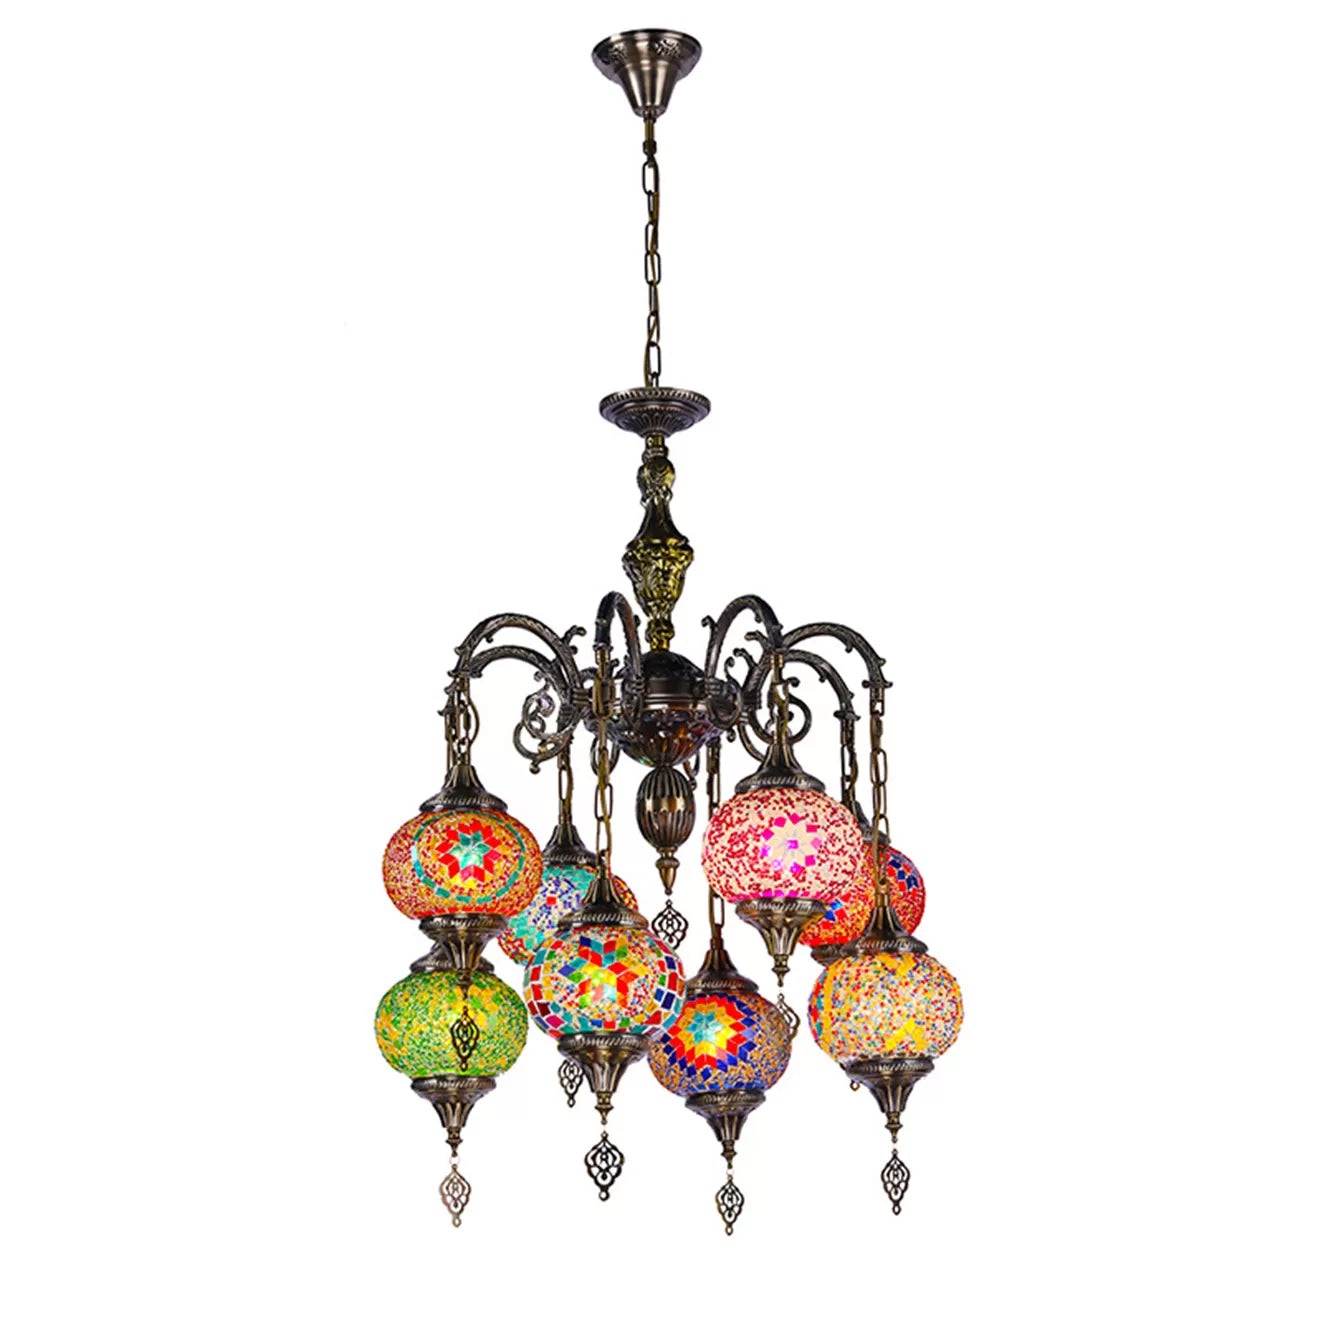 handmade-bohemian-style-ceiling-chandelier-nightingale-lamp-handcrafted-home-decor-multi-colour-beautiful-elegant-metal-glass-large-size-landing-area-antique-multicolour-hanging